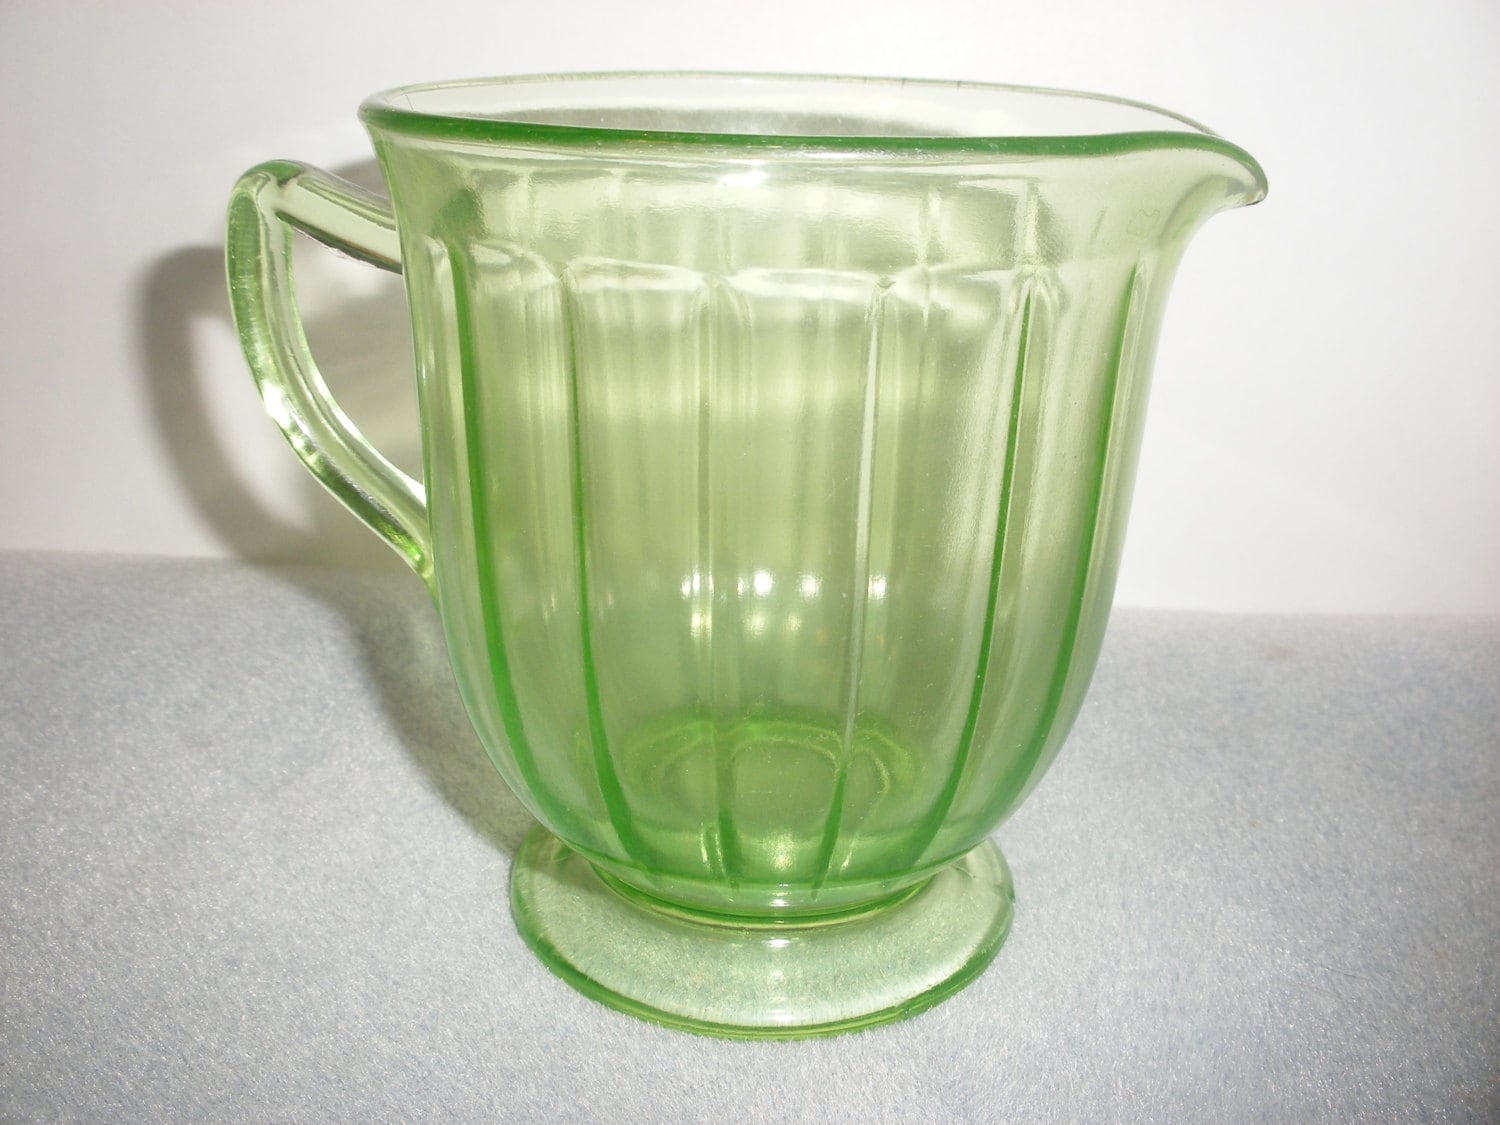 Vintage Green Depression Glass Creamer T 173 By Jewelcard On Etsy